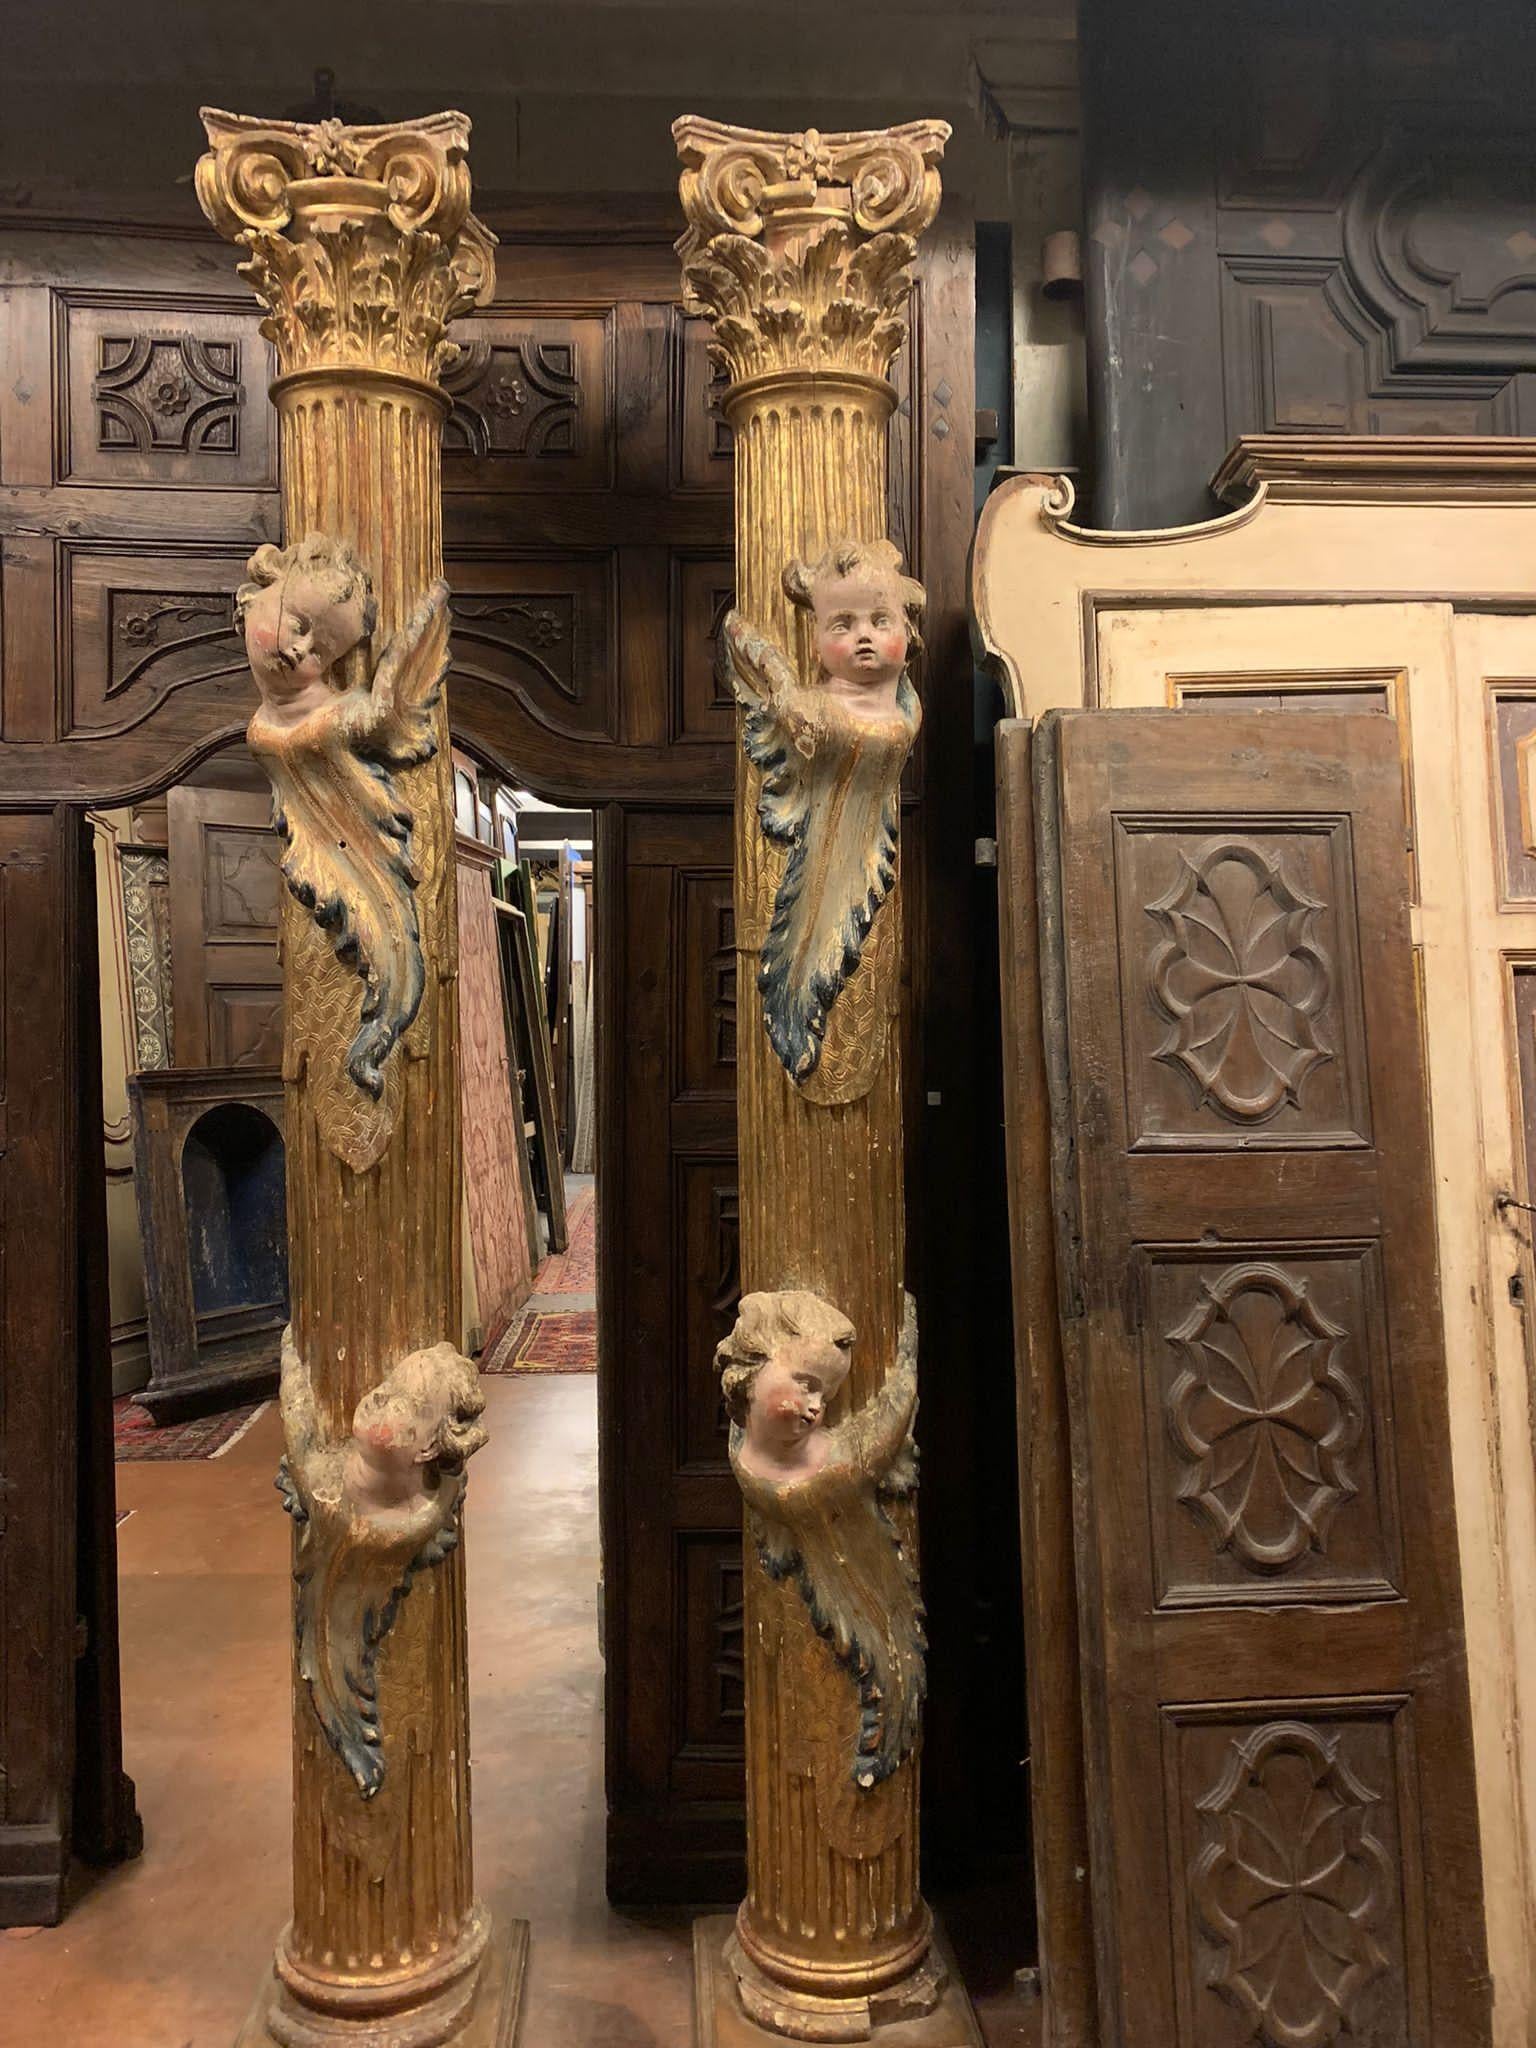 Ancient pair of columns in solid wood, richly carved and gilded, enriched with banded polychrome cherubs, of high age and hand-built in the 1600s, coming from an ancient church in Spain, measuring 40 x 40 x H 265 cm base.
Incredible historical find,